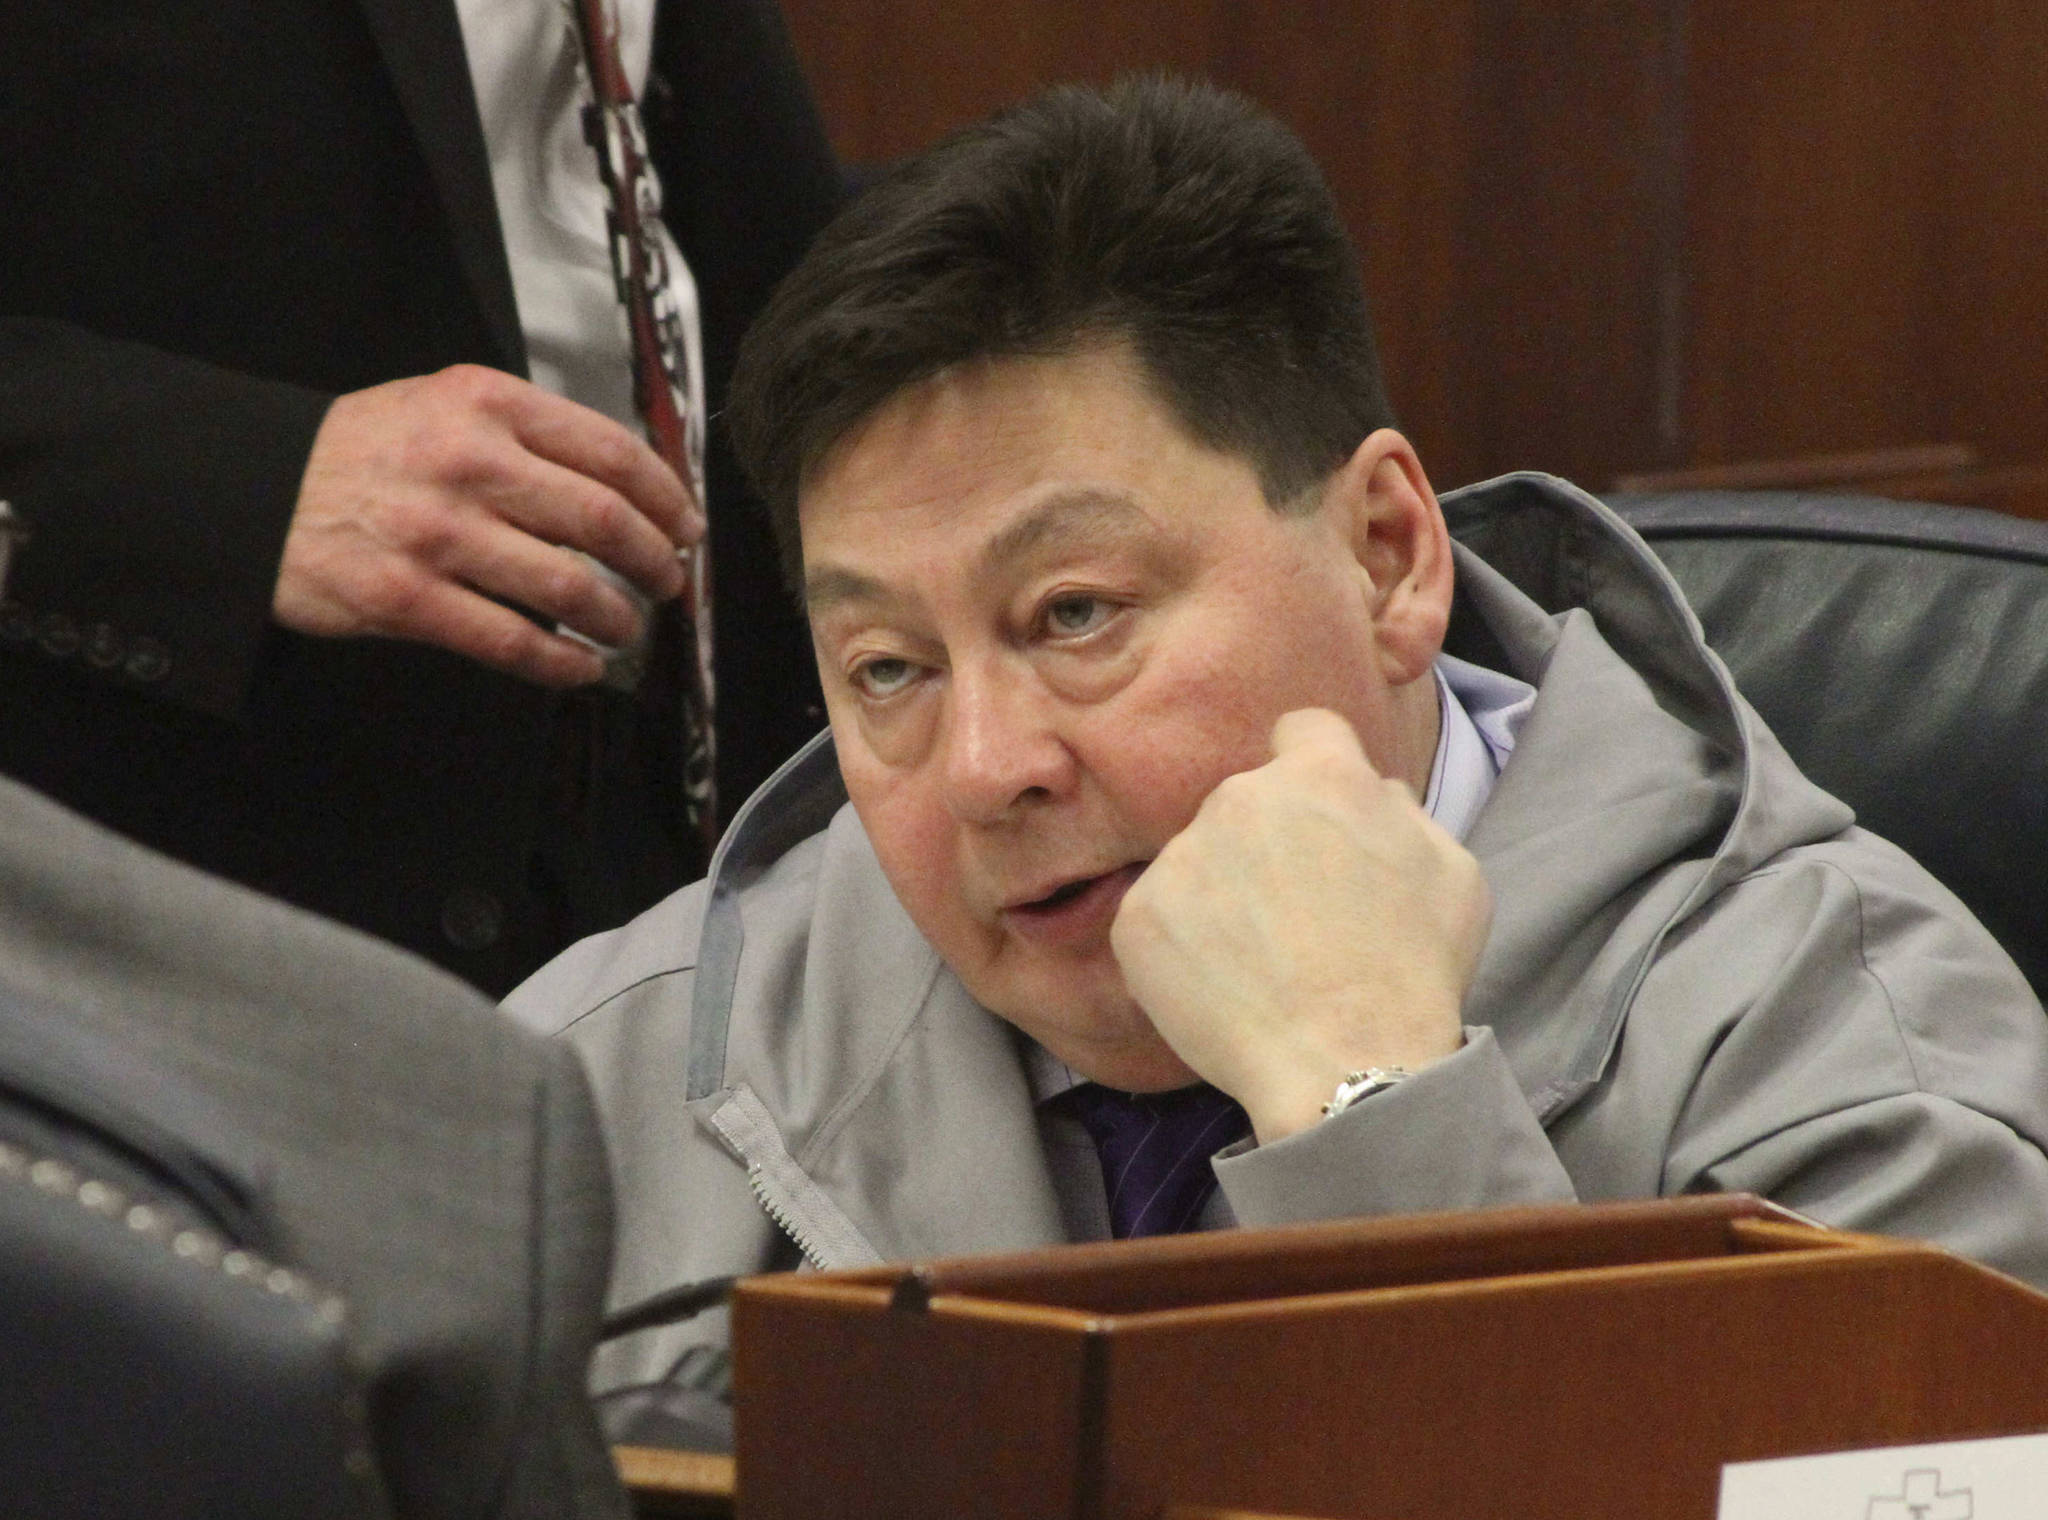 In this Jan. 17, 2017 photo, state Rep. Dean Westlake, D-Kotzebue, talks with another legislator during a break in the opening session of the Alaska Legislature in Juneau, Alaska. An Alaska state representative accused of inappropriate behavior by a former legislative aide says he apologizes if an encounter with him “made anyone uncomfortable.” Westlake released the statement after allegations against him were made public by the aide, Olivia Garrett, who did not work in Westlake’s office. (Mark Thiessen | The Associated Press File)